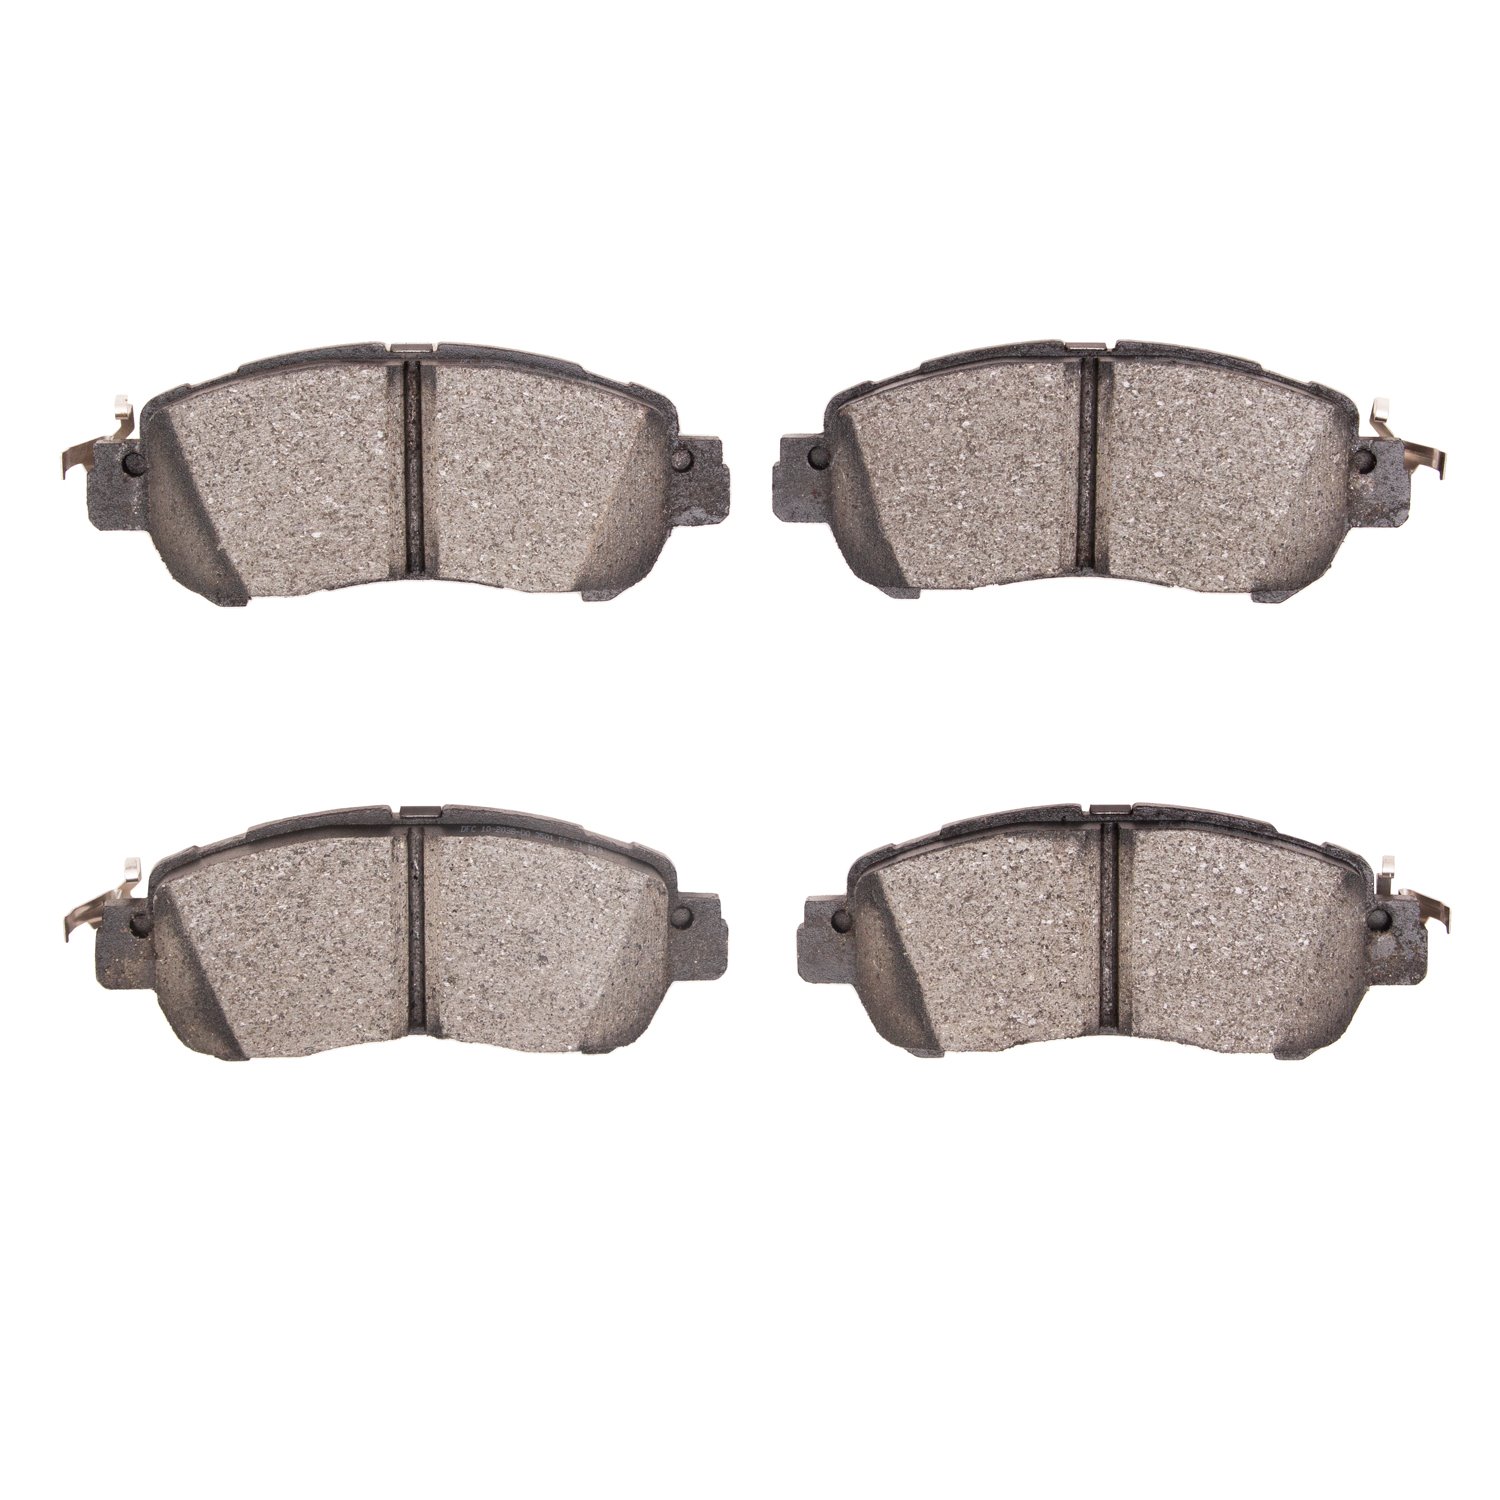 1310-2038-00 3000-Series Ceramic Brake Pads, Fits Select Infiniti/Nissan, Position: Front